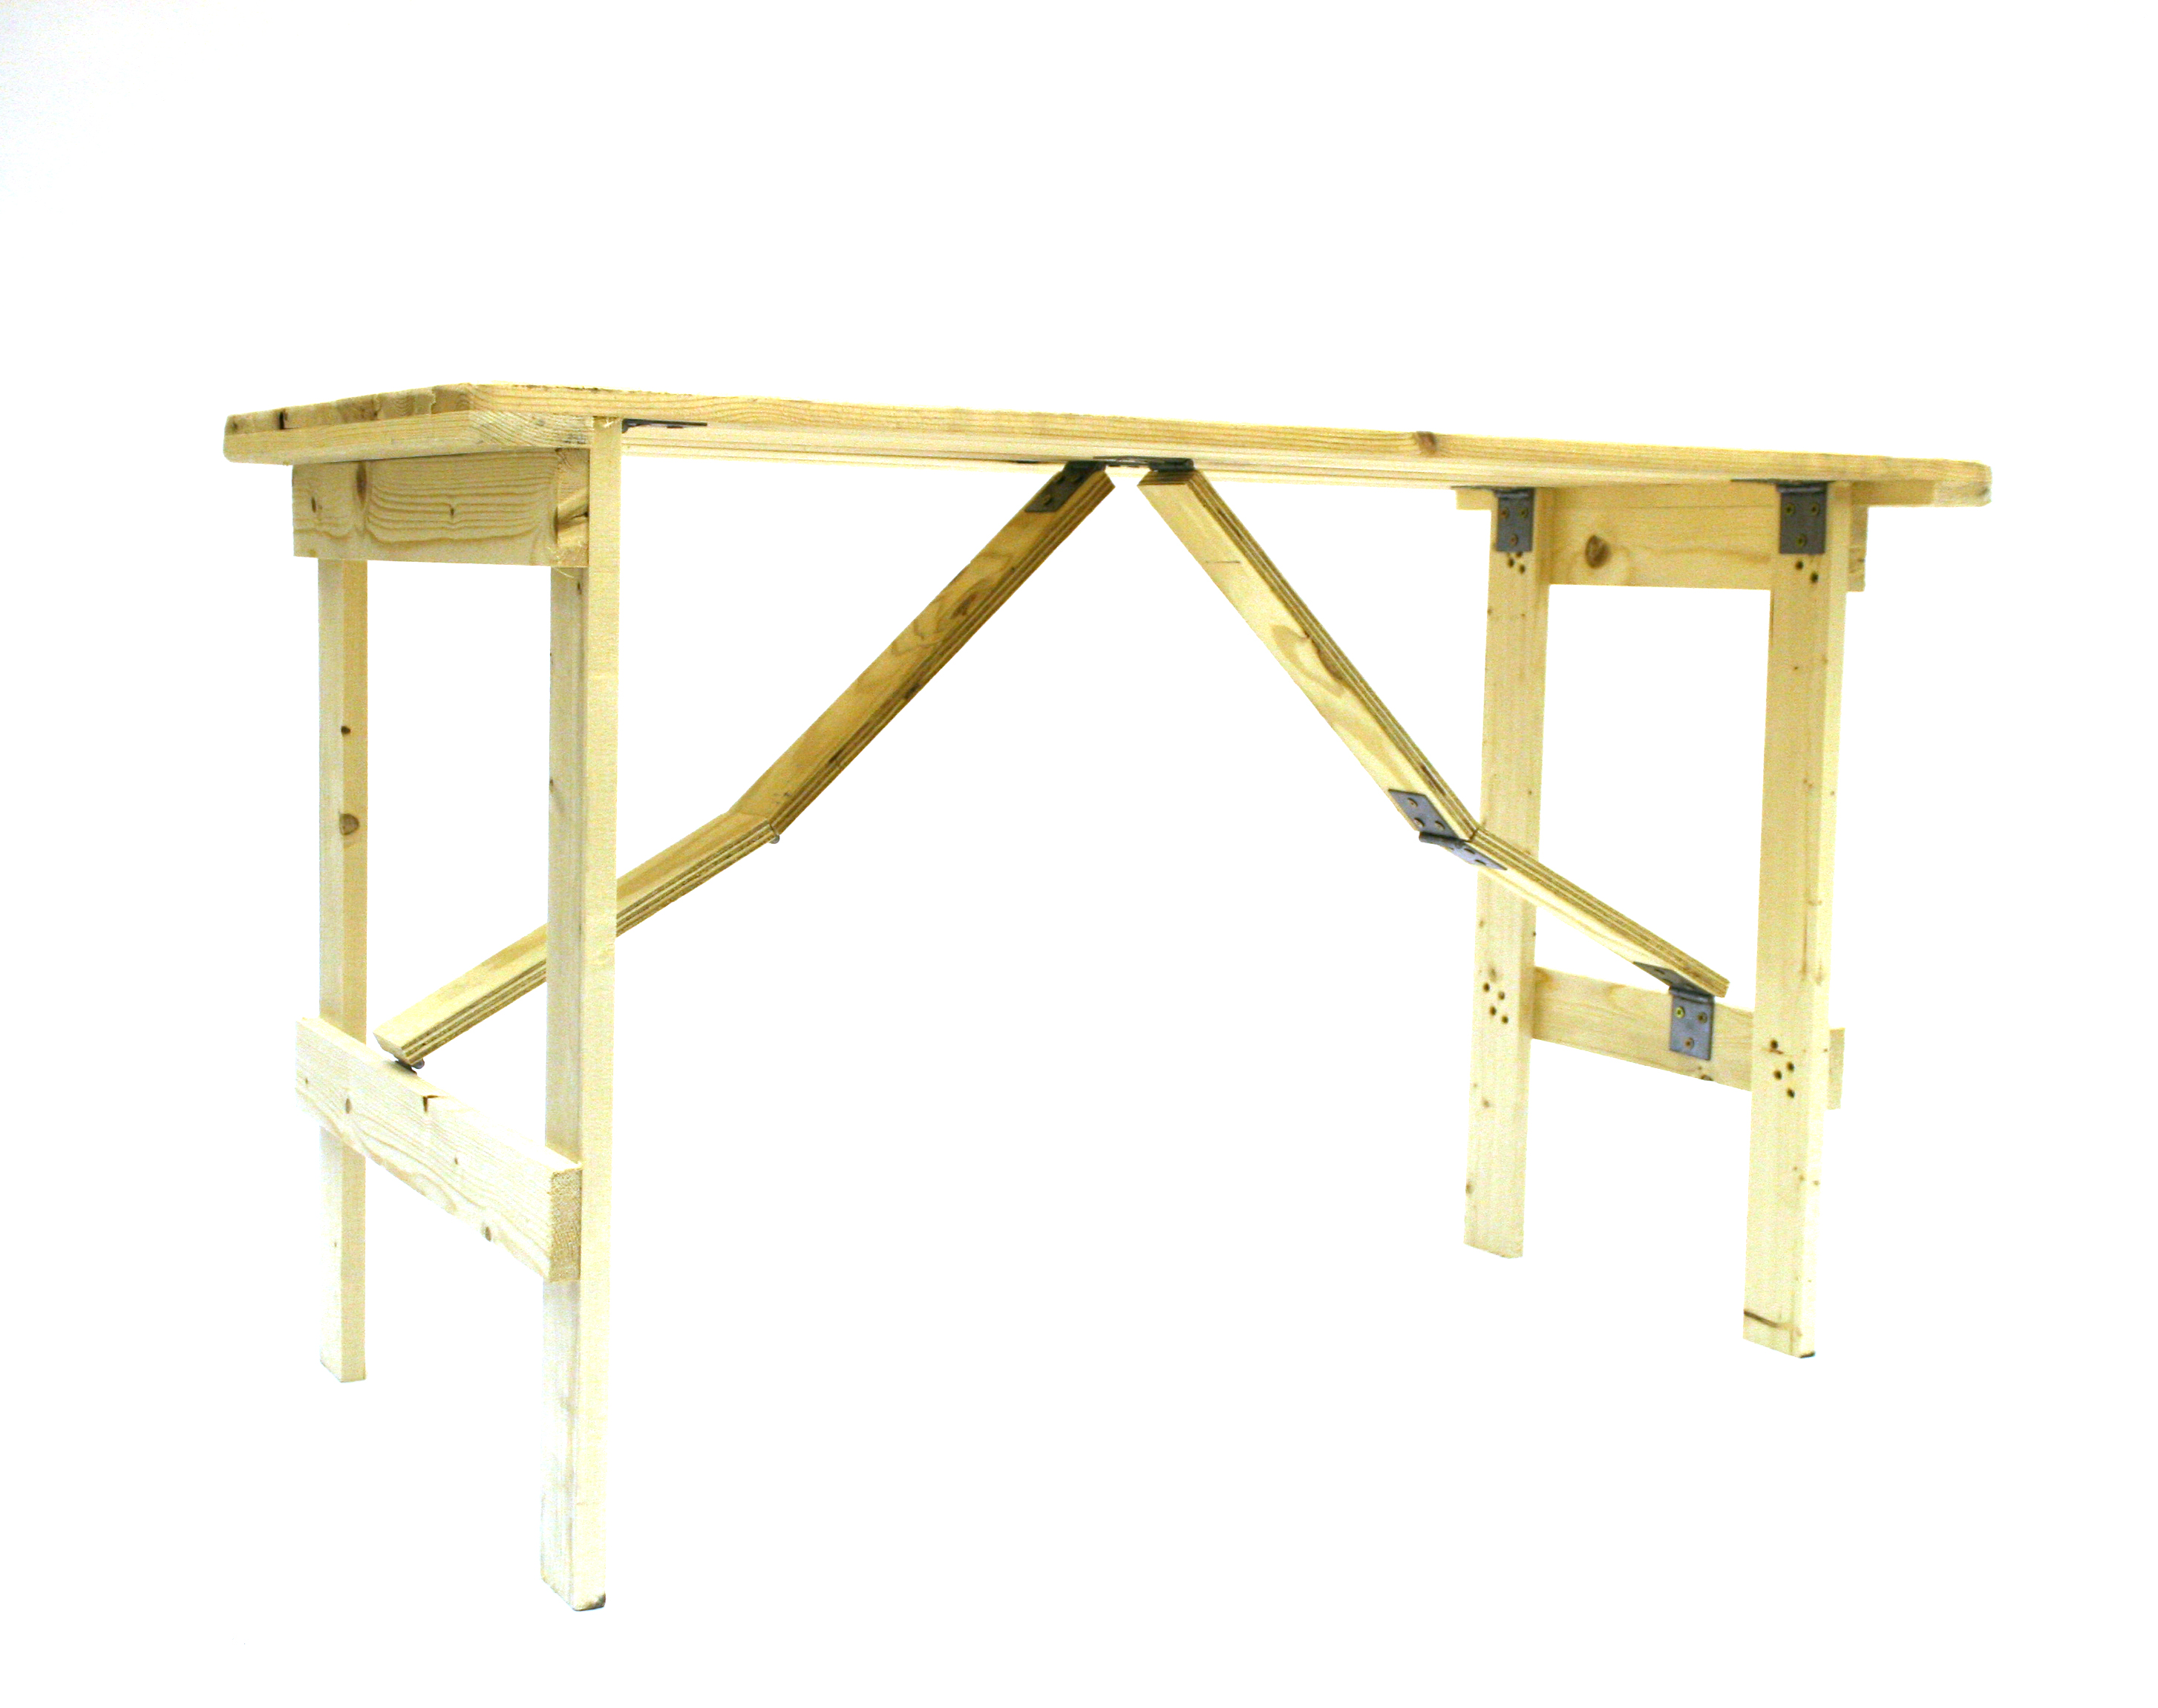 4' x 2' Trestle Table - BE Event Hire